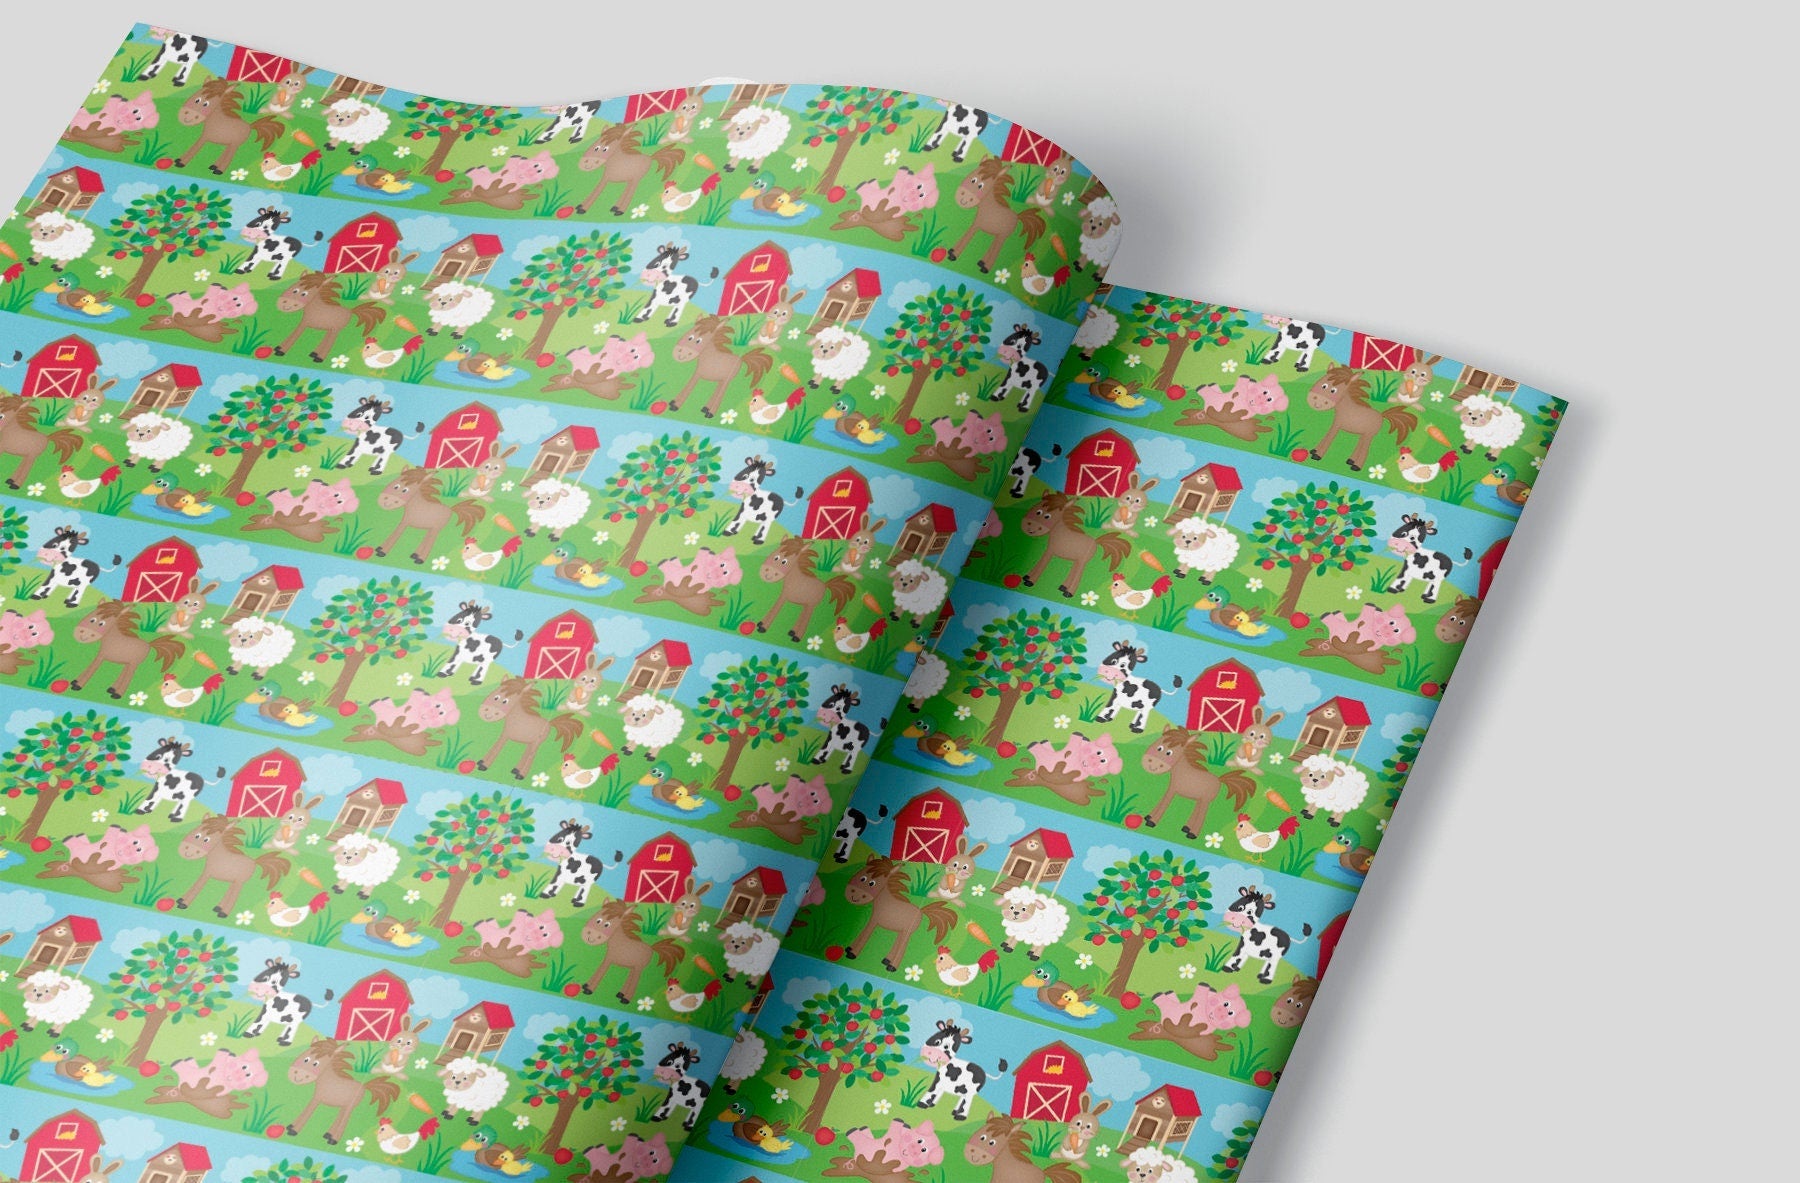 Wrapping Paper with a red barn and farm animals